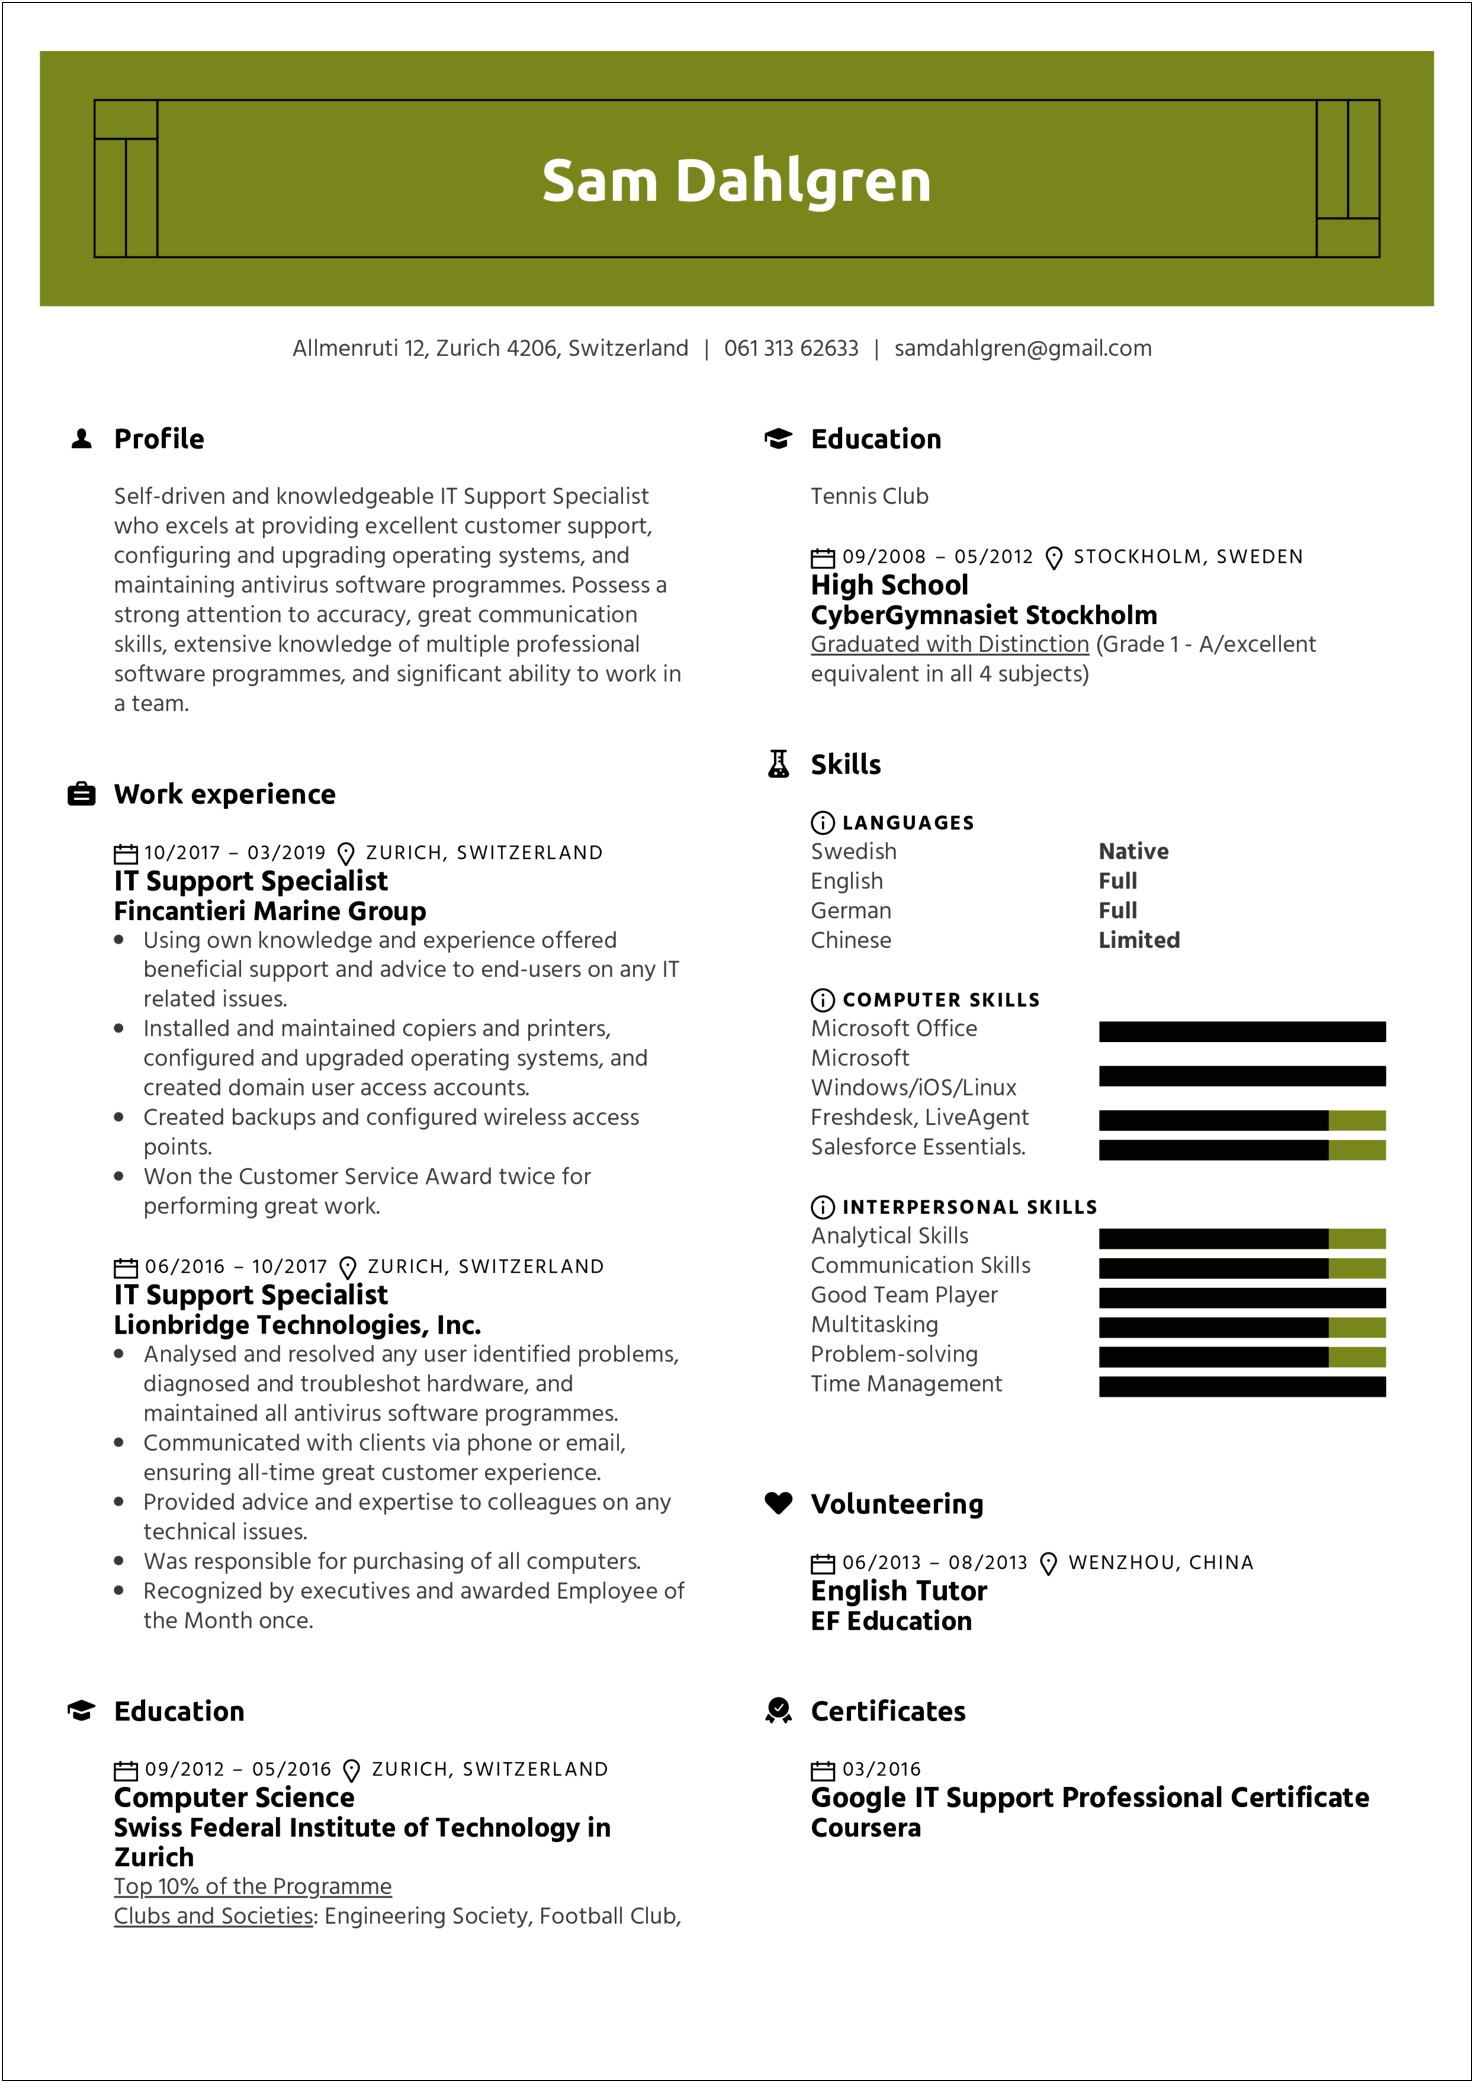 Resume Samples With Certification Images